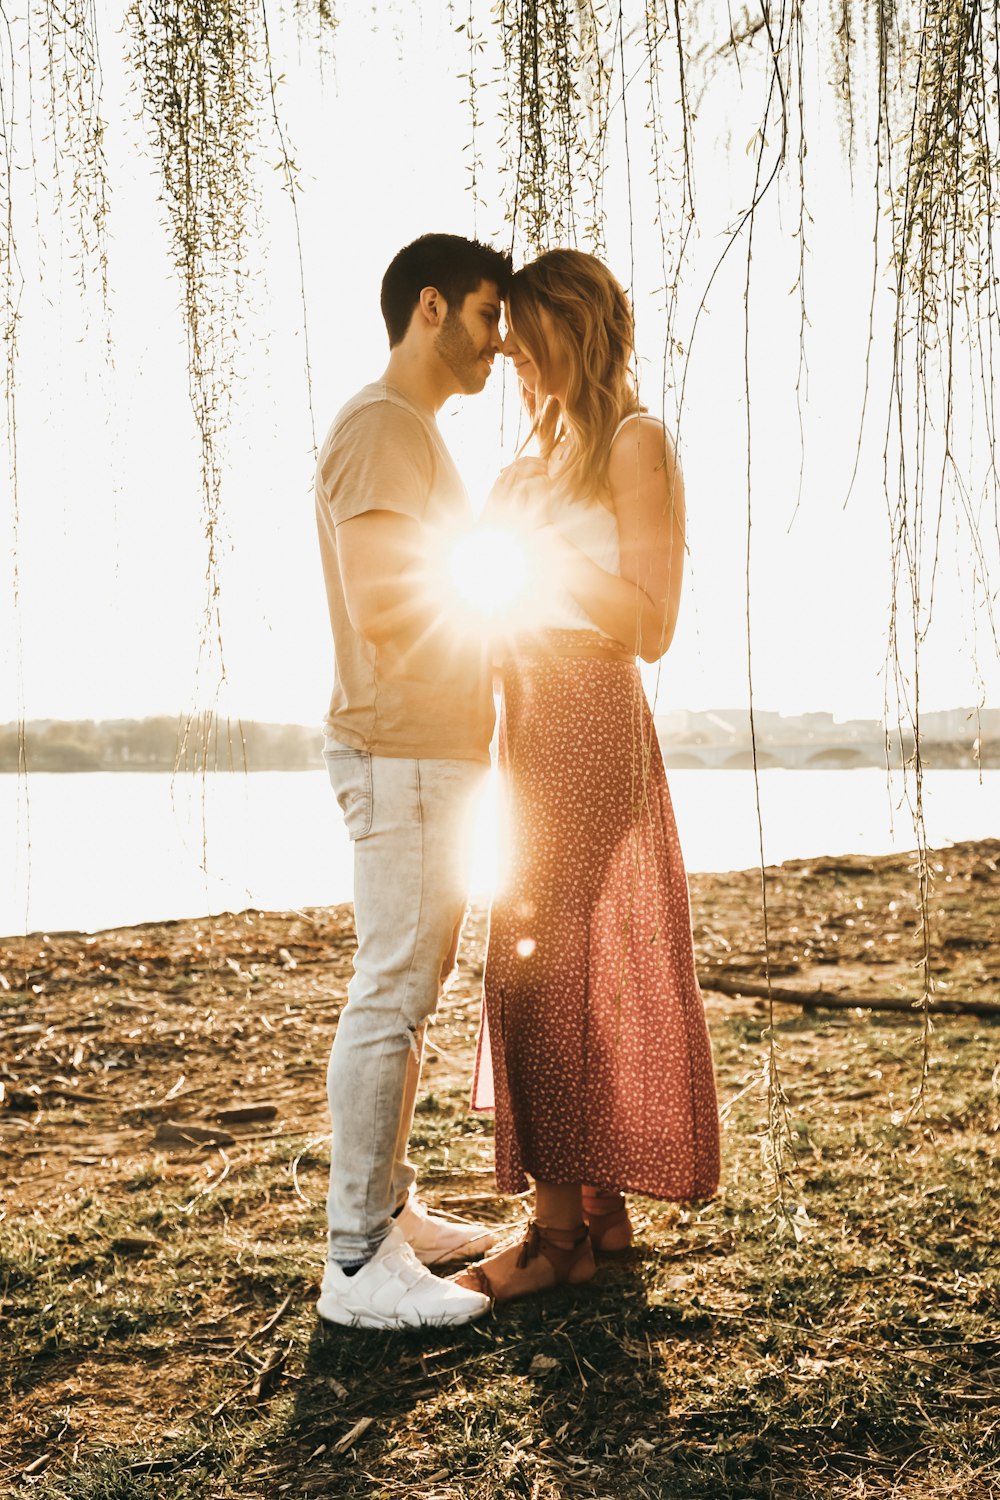 750 Couples Pictures Download Free Images On Unsplash See more of romantic couple on facebook. 750 couples pictures download free